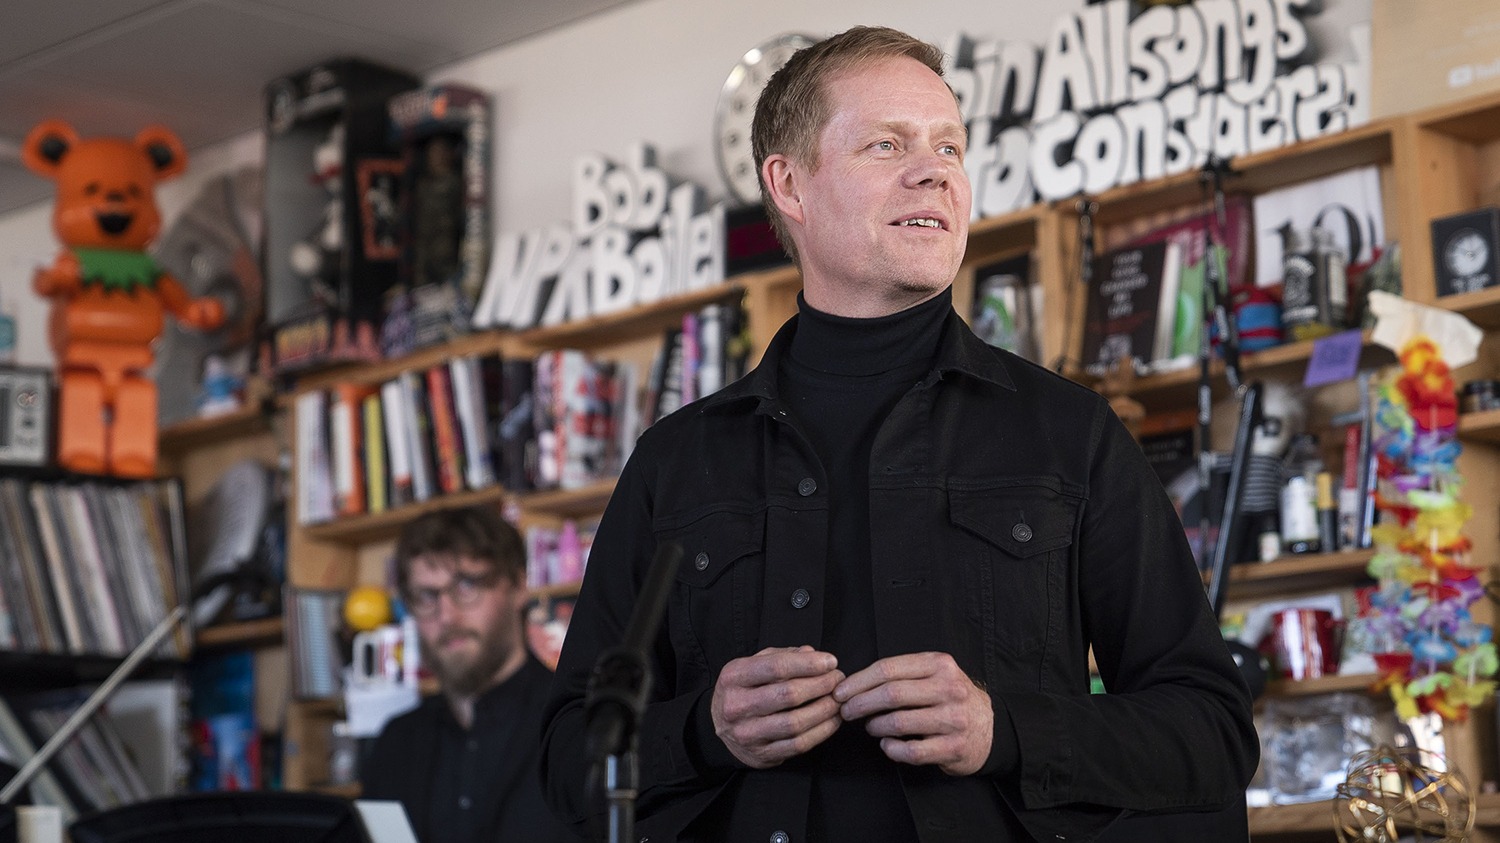 Max Richter Brings Achingly Beautiful Compositions 'On The Of Daylight' To NPR's Tiny Desk -